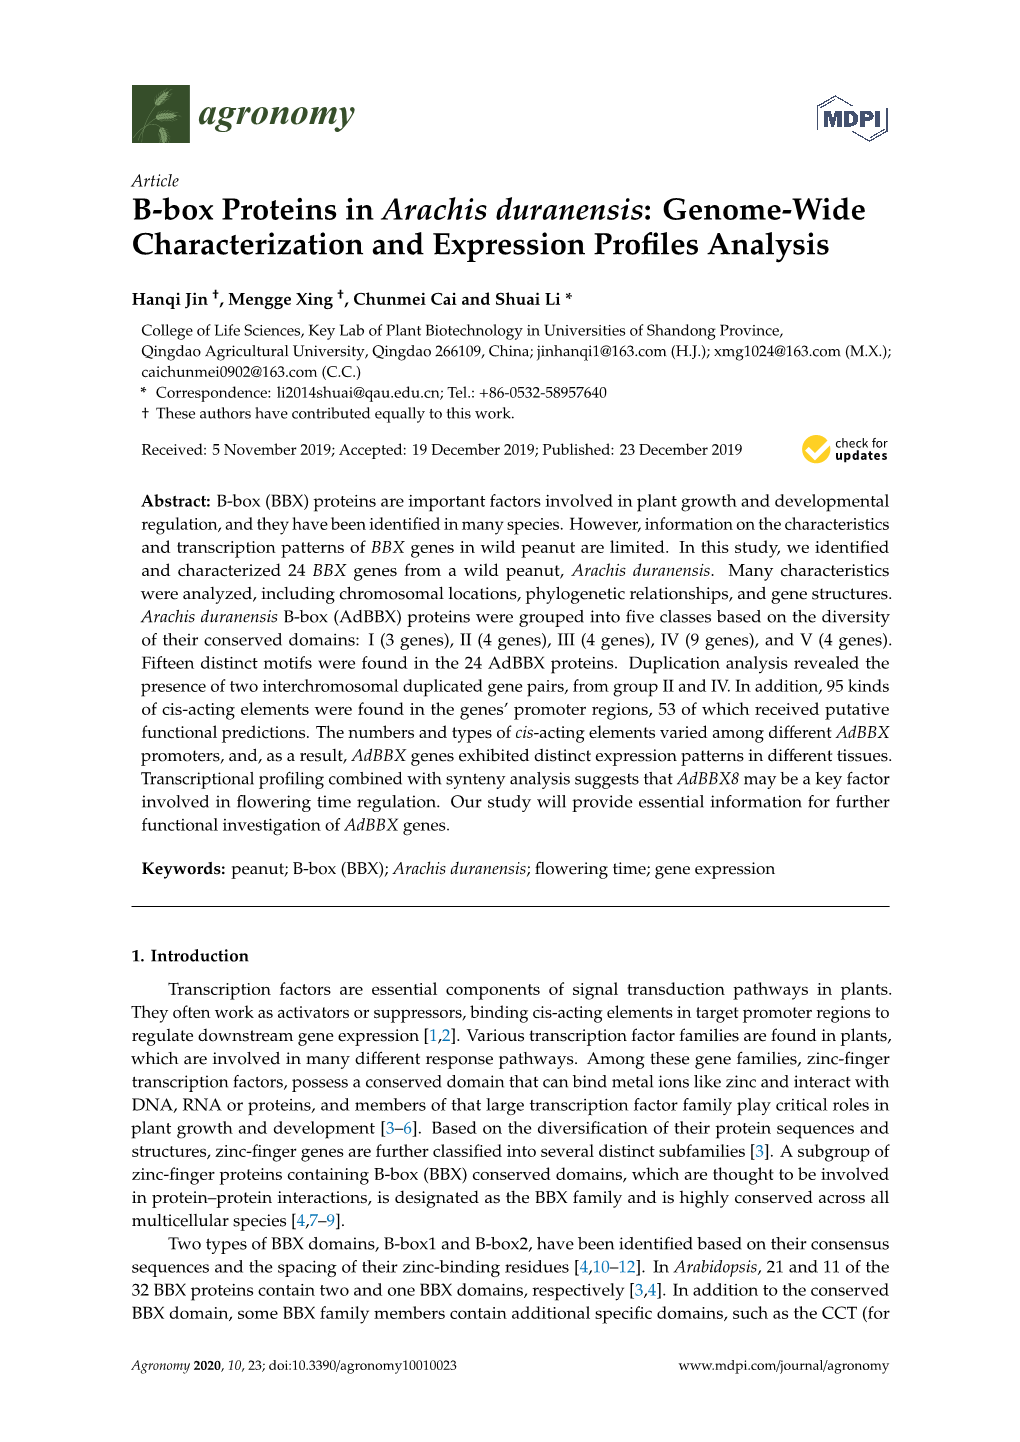 B-Box Proteins in Arachis Duranensis: Genome-Wide Characterization and Expression Proﬁles Analysis